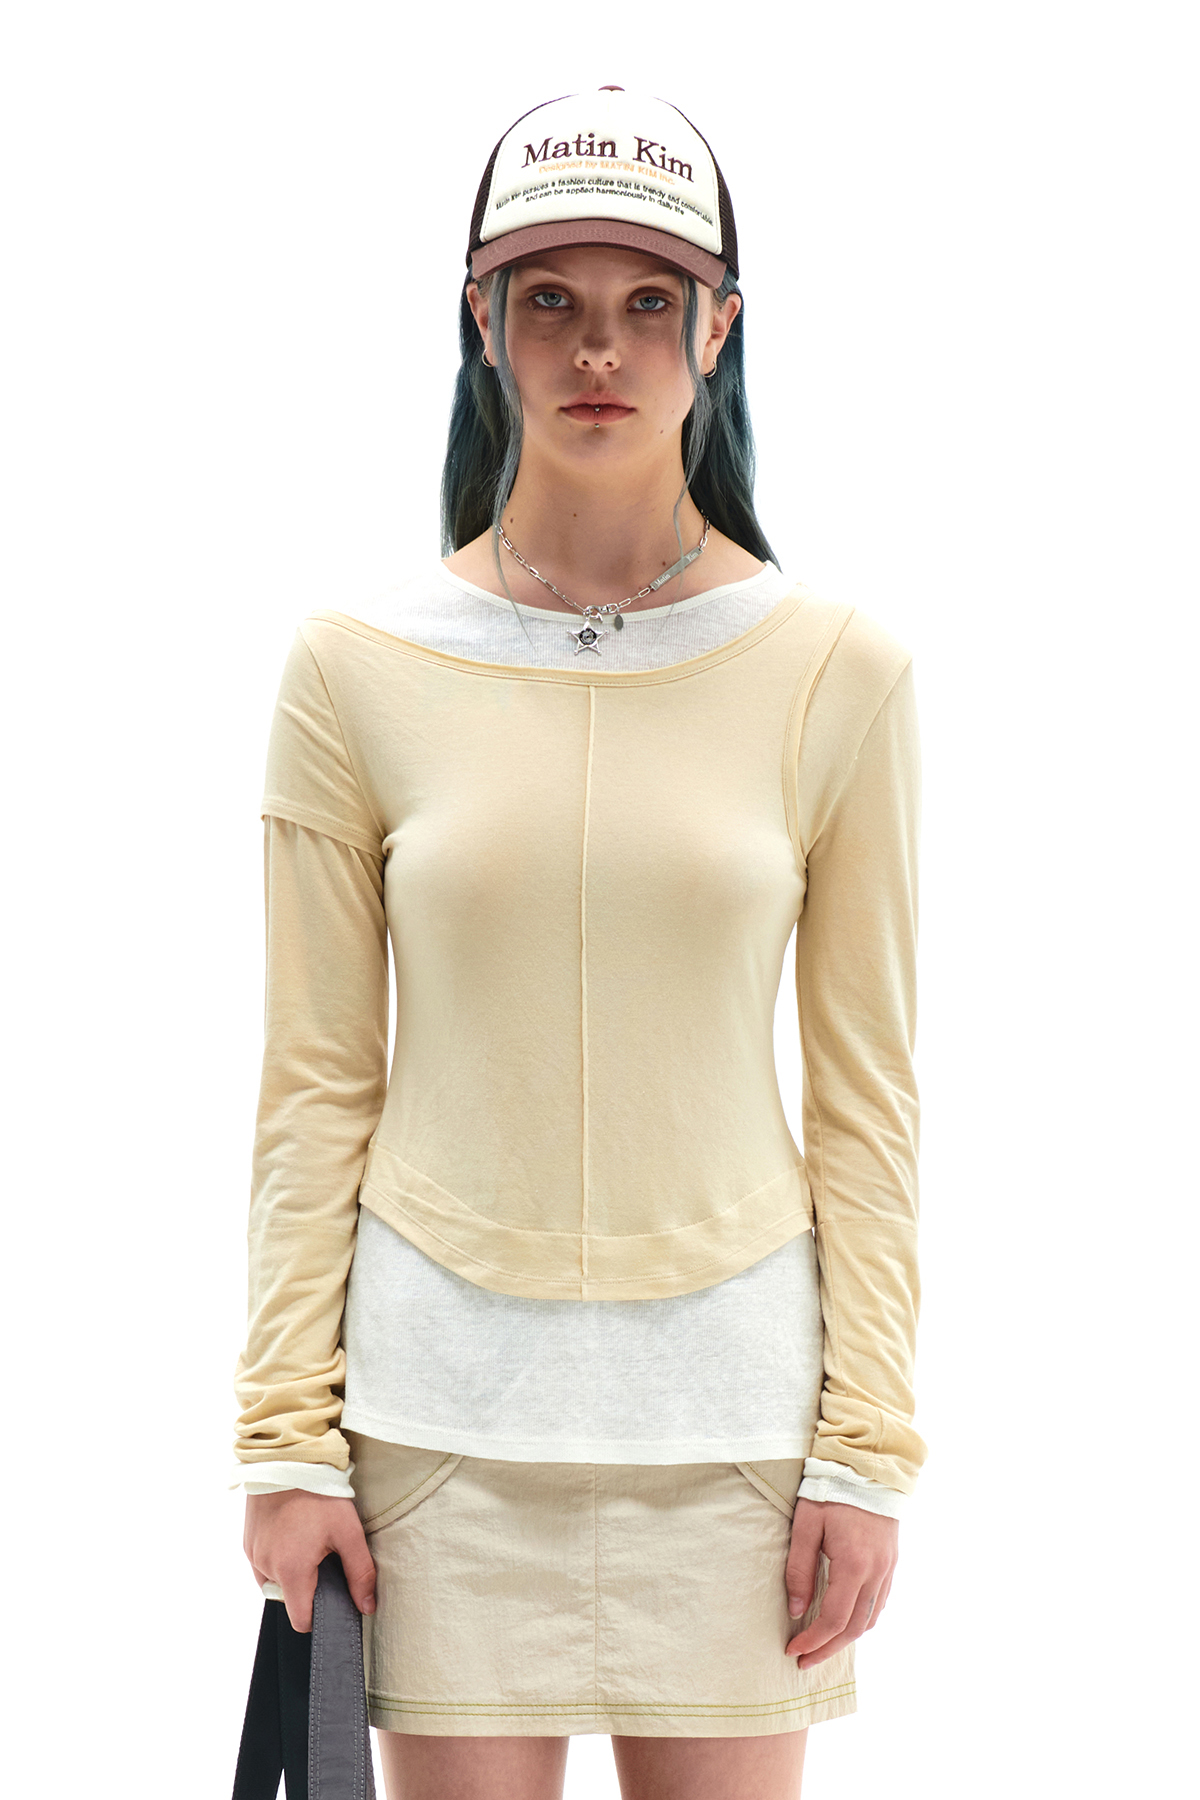 TWO TONE LAYERED TOP IN LIGHT YELLOW